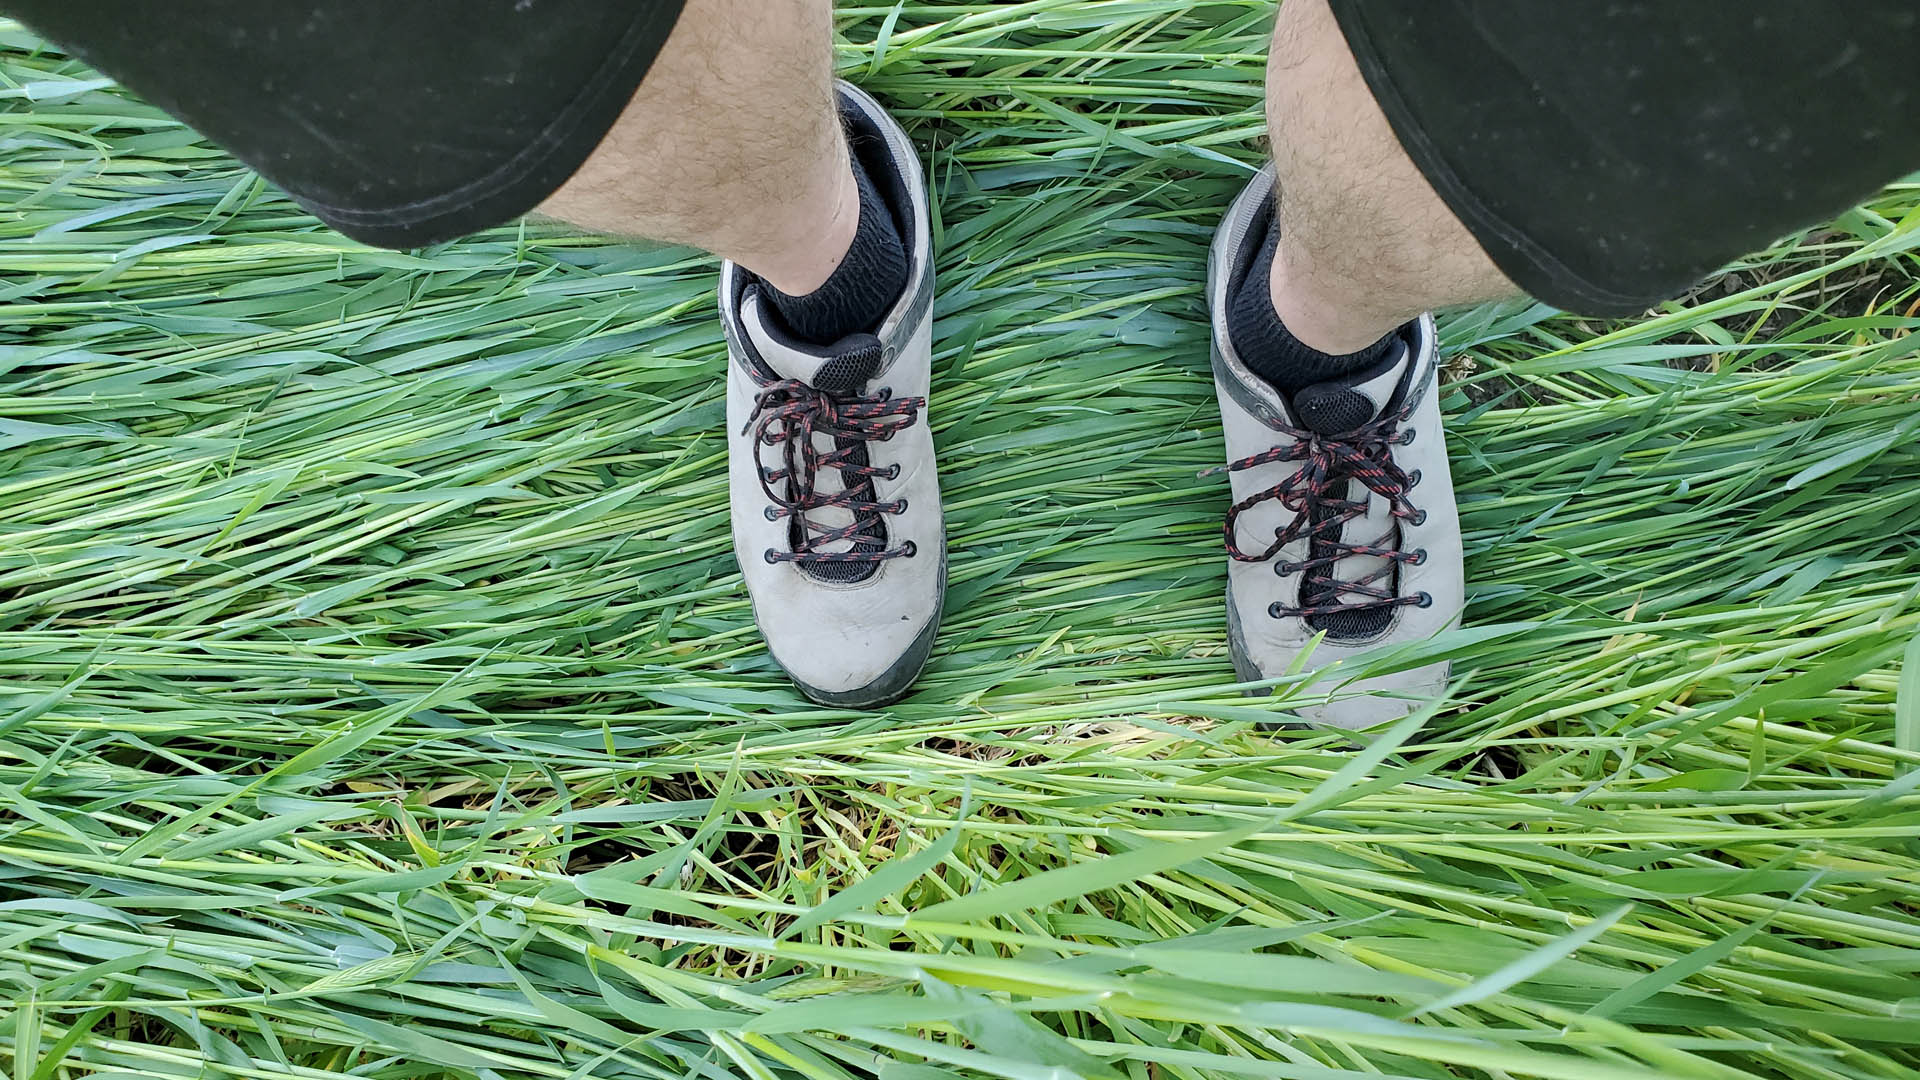 Feet on cereal rye